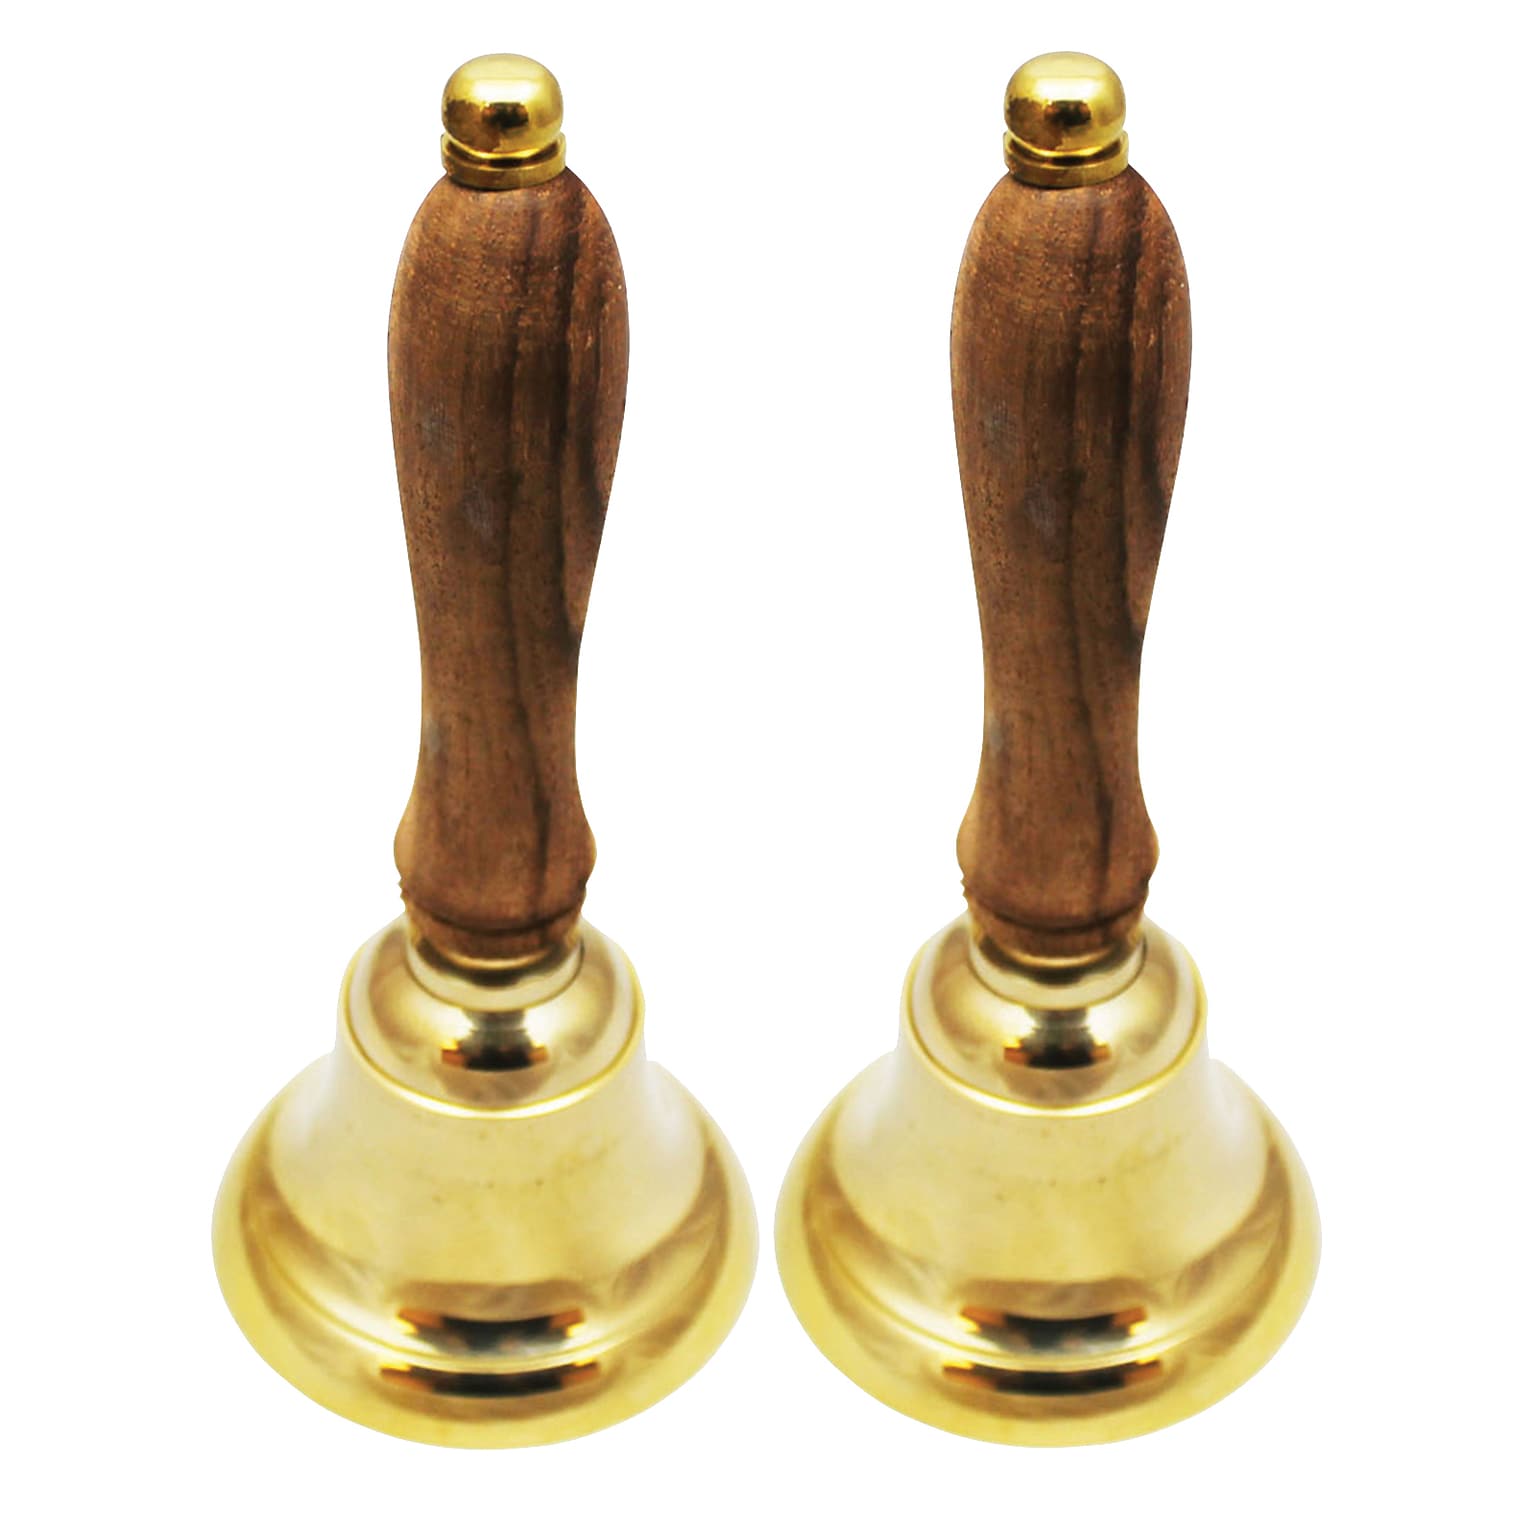 Affluence Unlimited Inc. School Hand Bell, 6.5 Height, Pack of 2 (AU-48101-2)